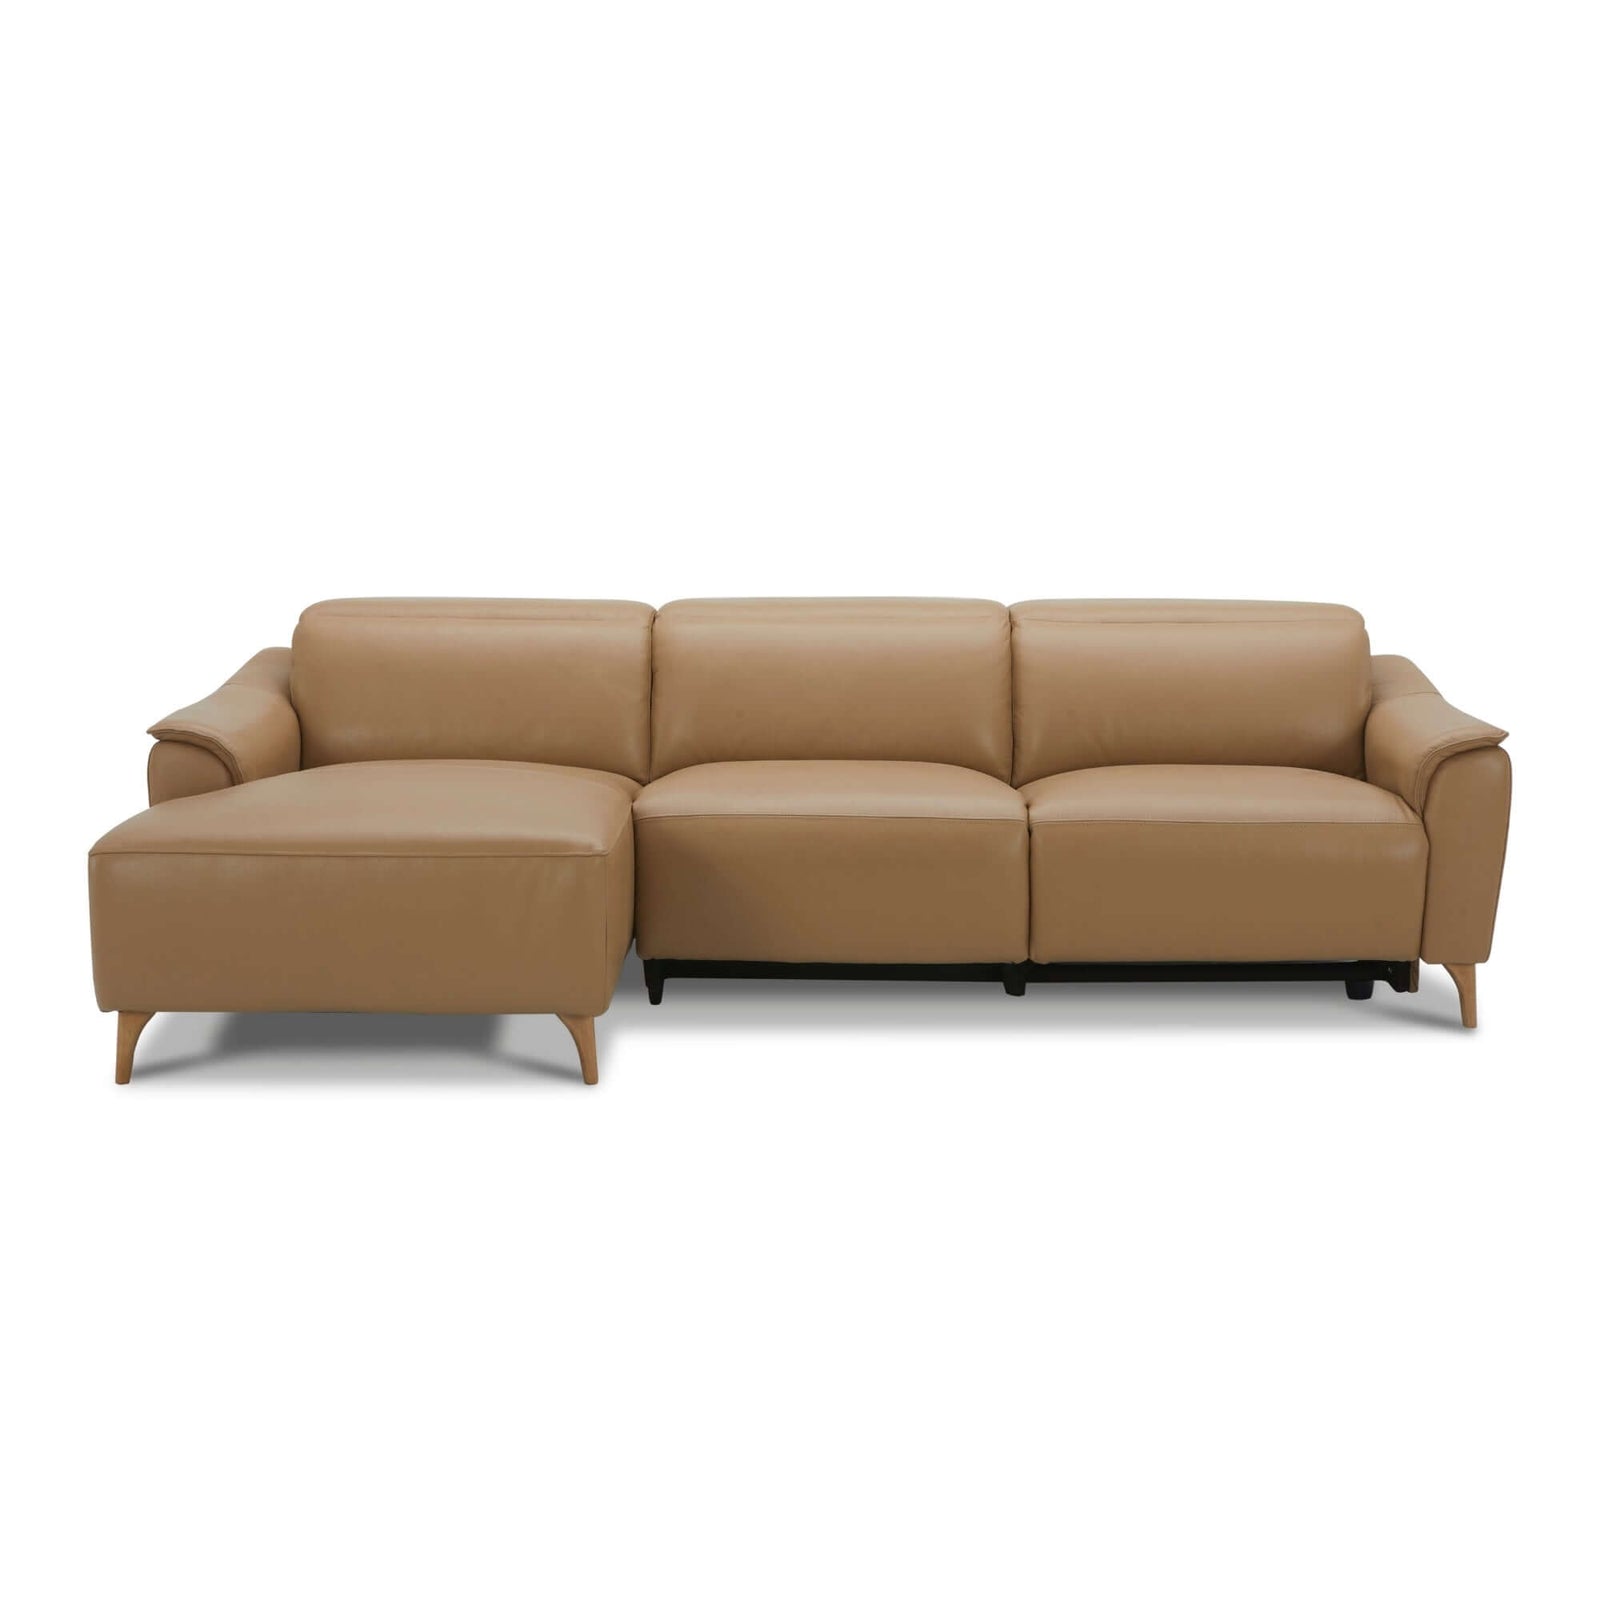 Inala 2 Seater Genuine Leather Sofa Lounge Electric Powered Recliner LHF Chaise Latte-Upinteriors